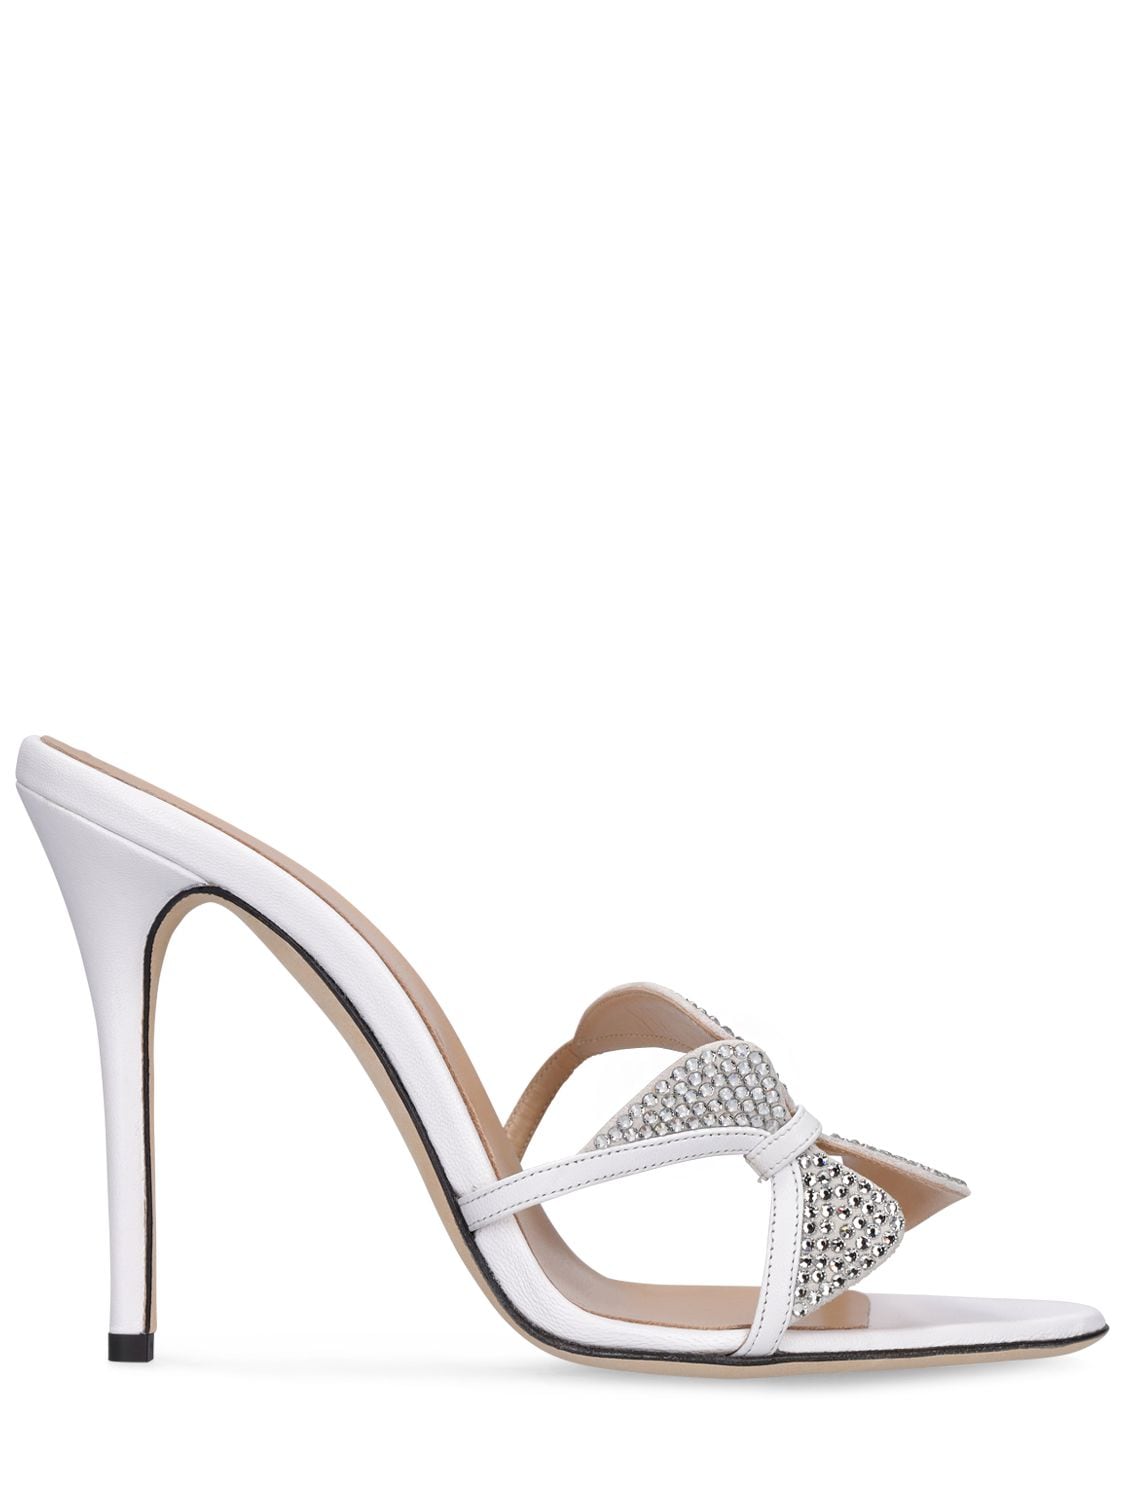 ALESSANDRA RICH 100MM LEATHER & CRYSTAL SANDALS